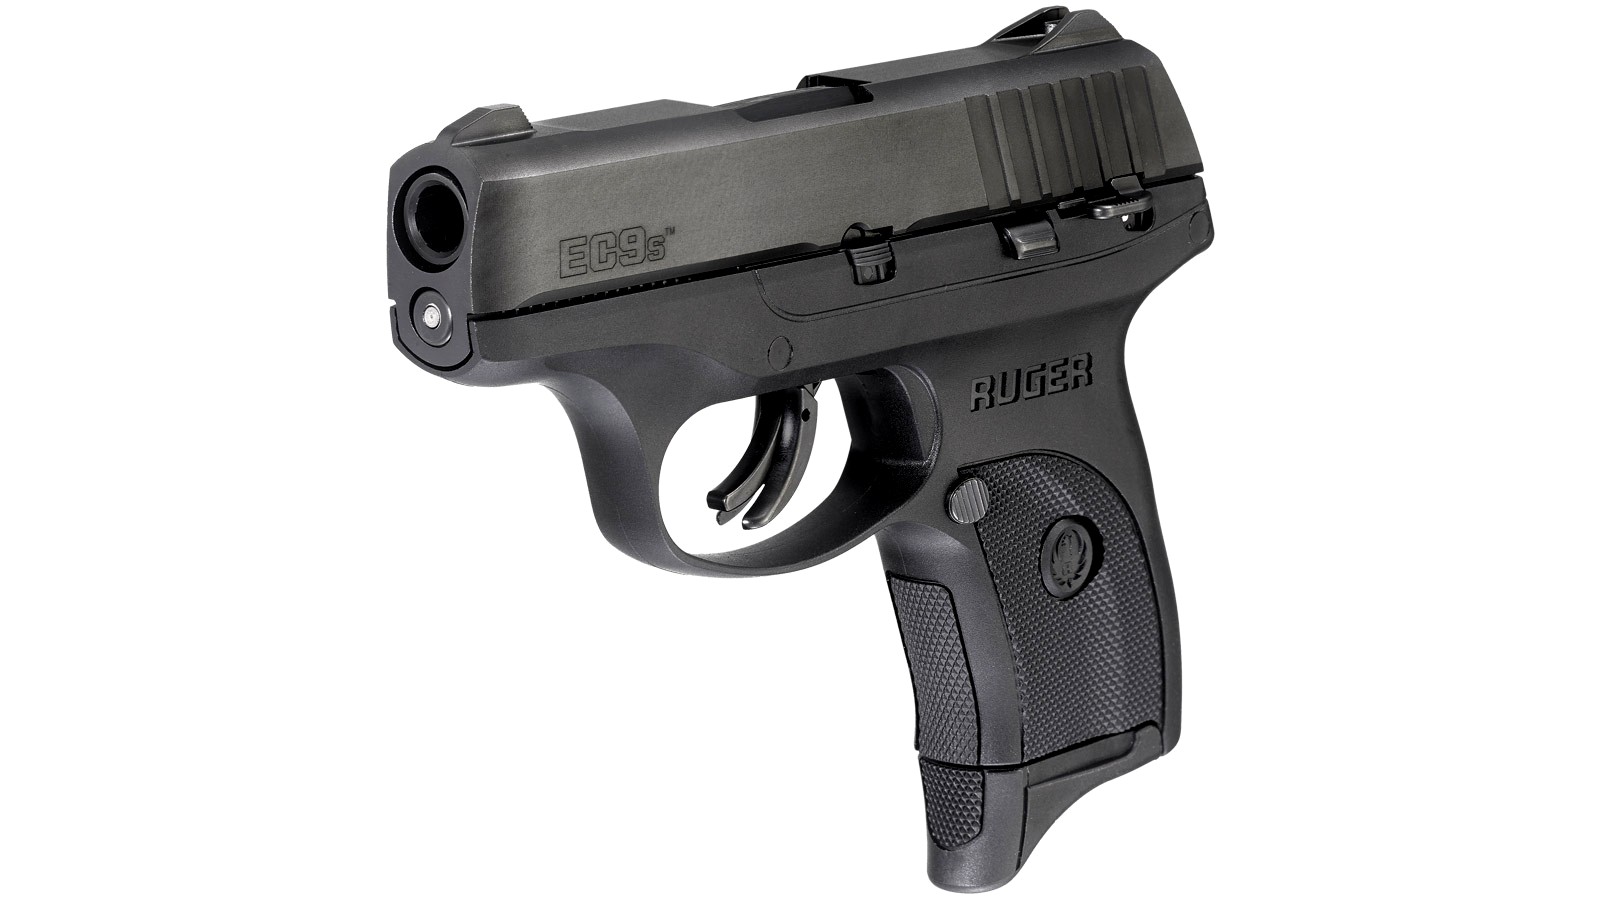 New Ruger EC9S, 9mm, 3.1" BBL, 7 Rounds: Sold.